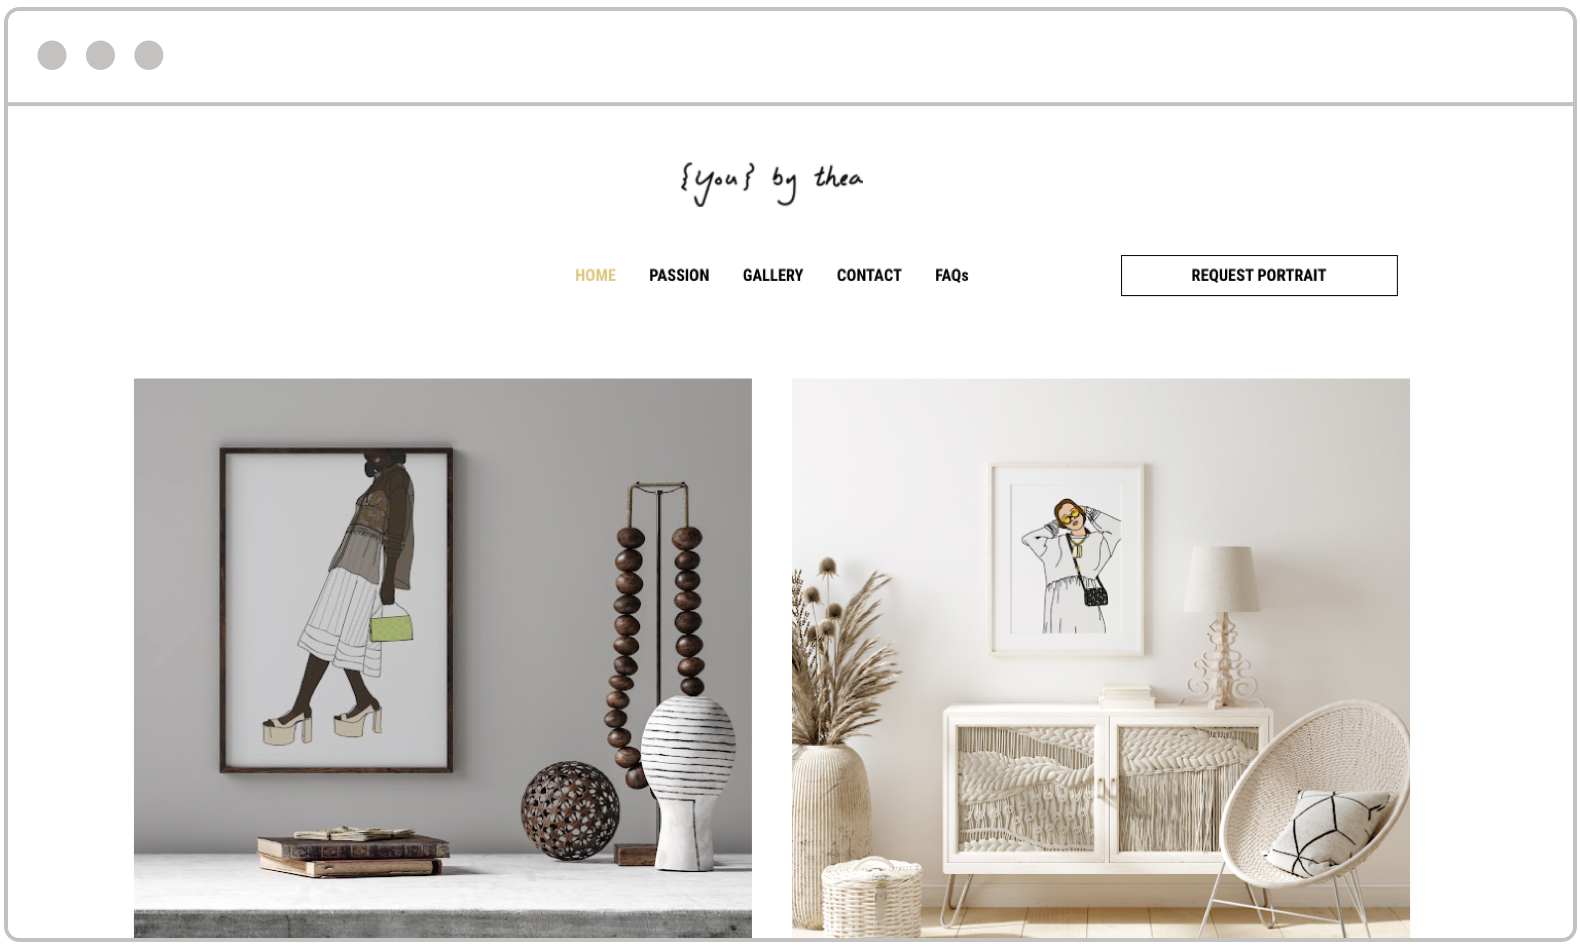 17 Awesome Small Business Website Designs | Leadpages Blog